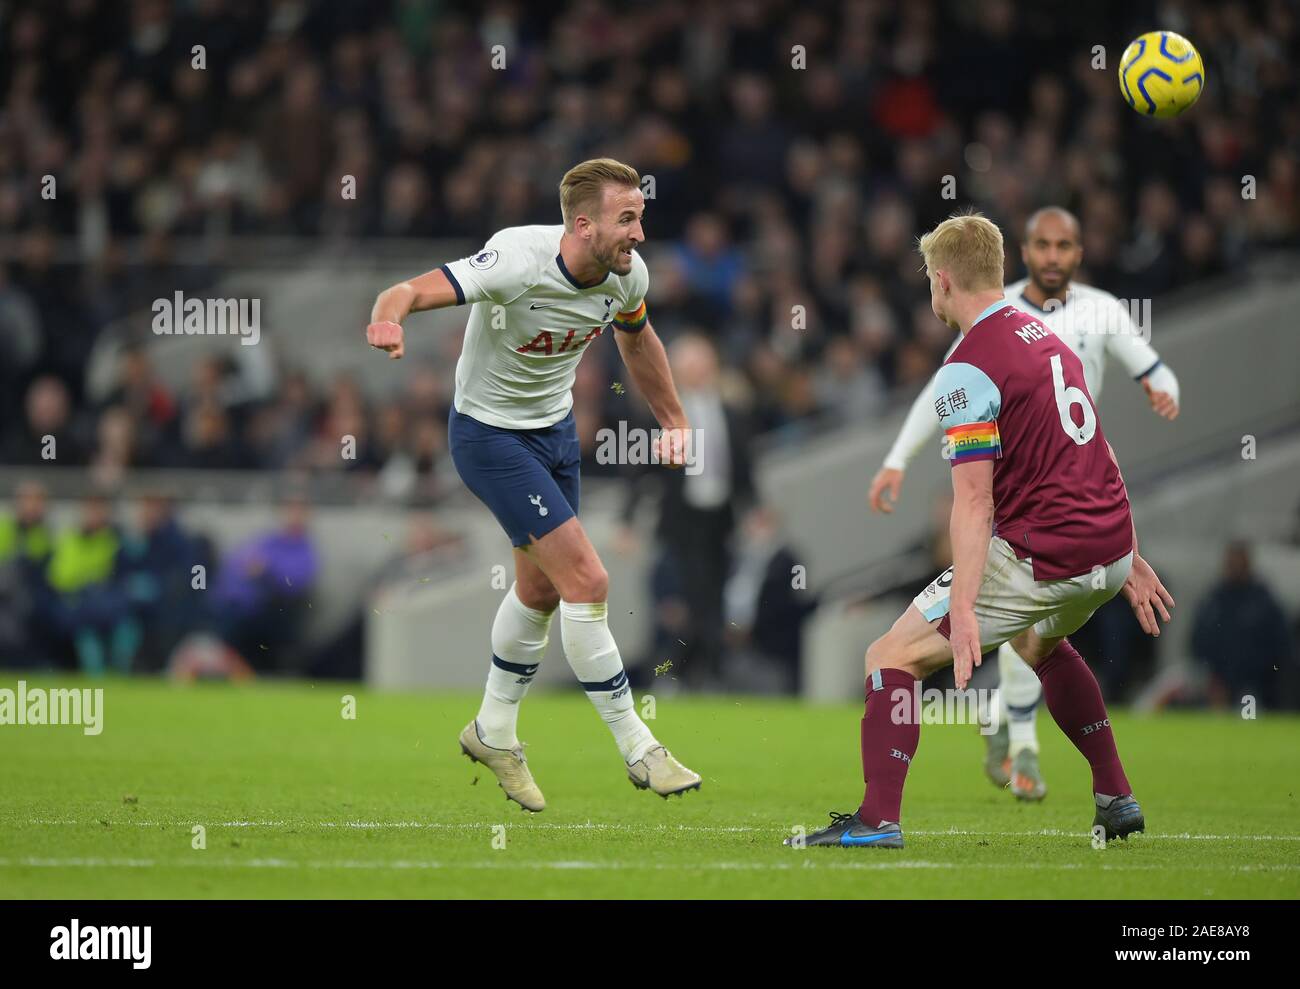 London, UK. 7th December 2019. Harry Kane of Tottenham Hotspur shoots for goal during the Tottenham Hotspur vs Burnley Premier League Football match at the Tottenham Hotspur Stadium on 7th December 2019-EDITORIAL USE ONLY No use with unauthorised audio, video, data, fixture lists (outside the EU), club/league logos or 'live' services. Online in-match use limited to 45 images (+15 in extra time). No use to emulate moving images. No use in betting, games or single club/league/player publications/services- Credit: Martin Dalton/Alamy Live News Stock Photo